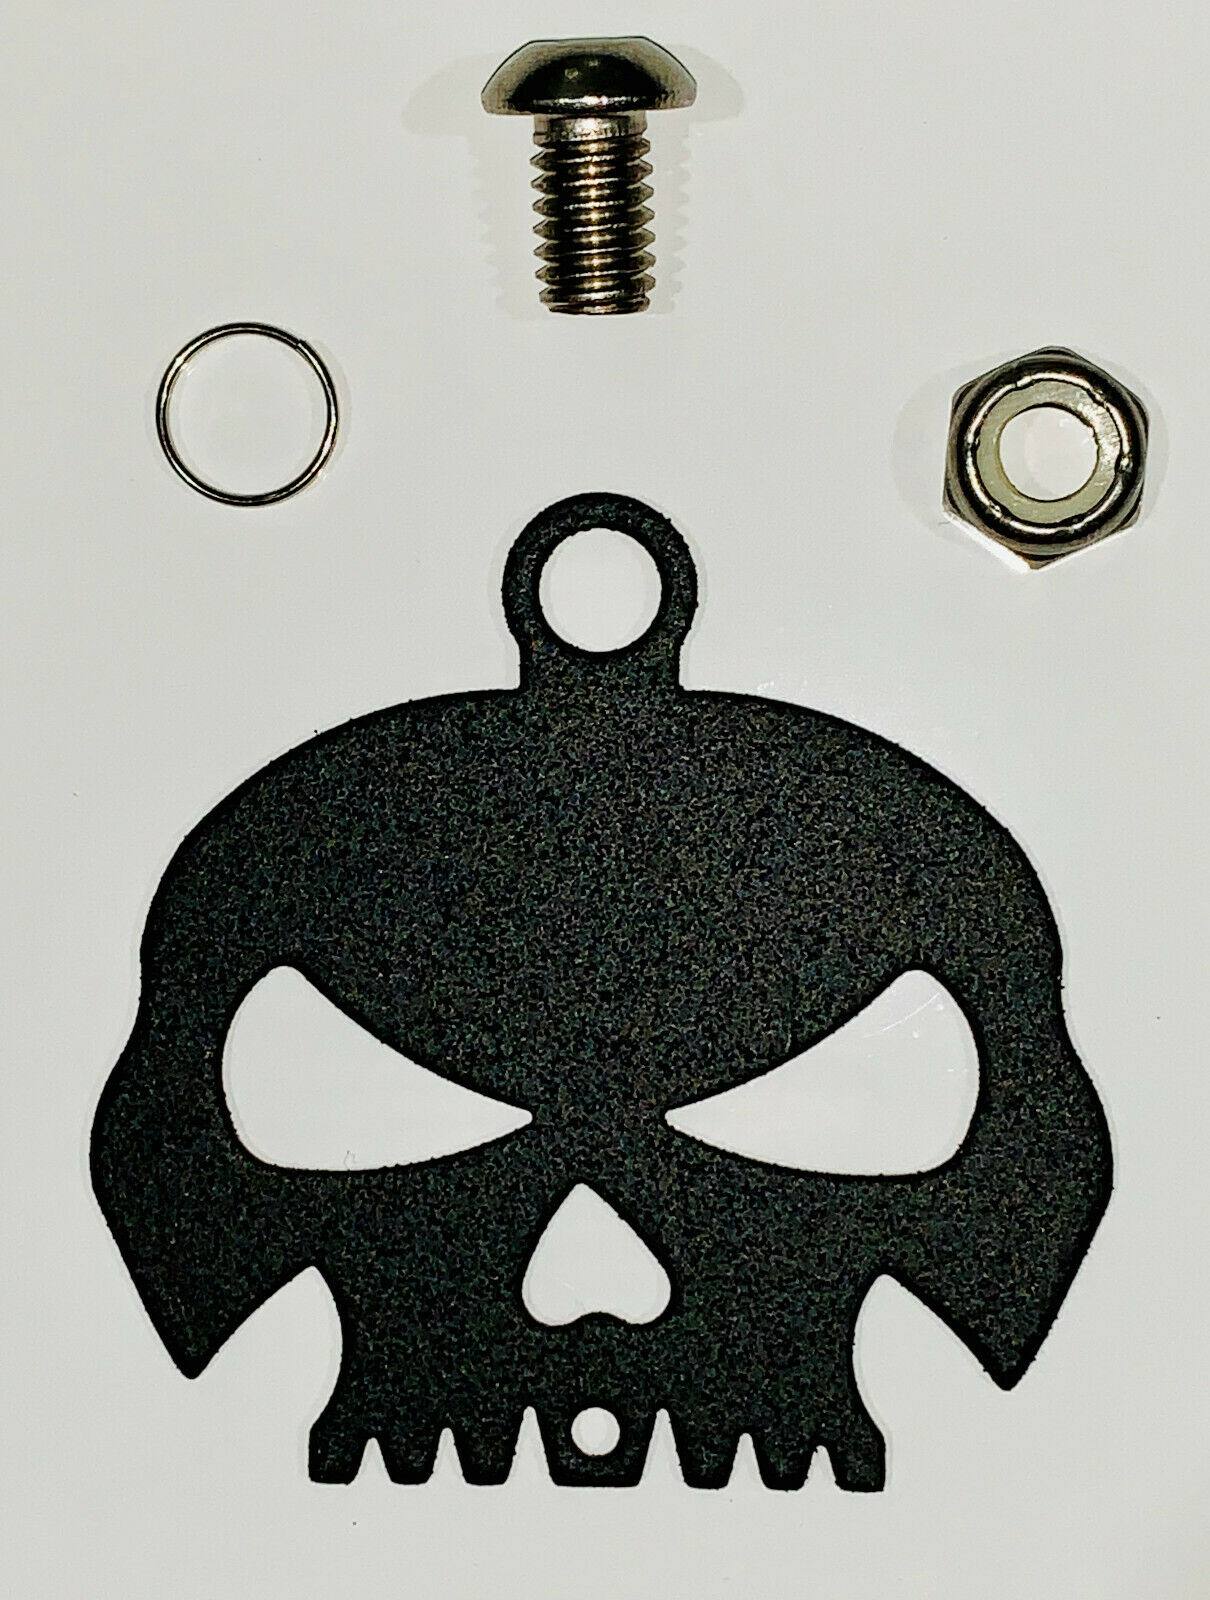 Textured Flat Black Skull Bell Hanger / Mount for Motorcycle Harley Bolt & Ring - Moto Life Products